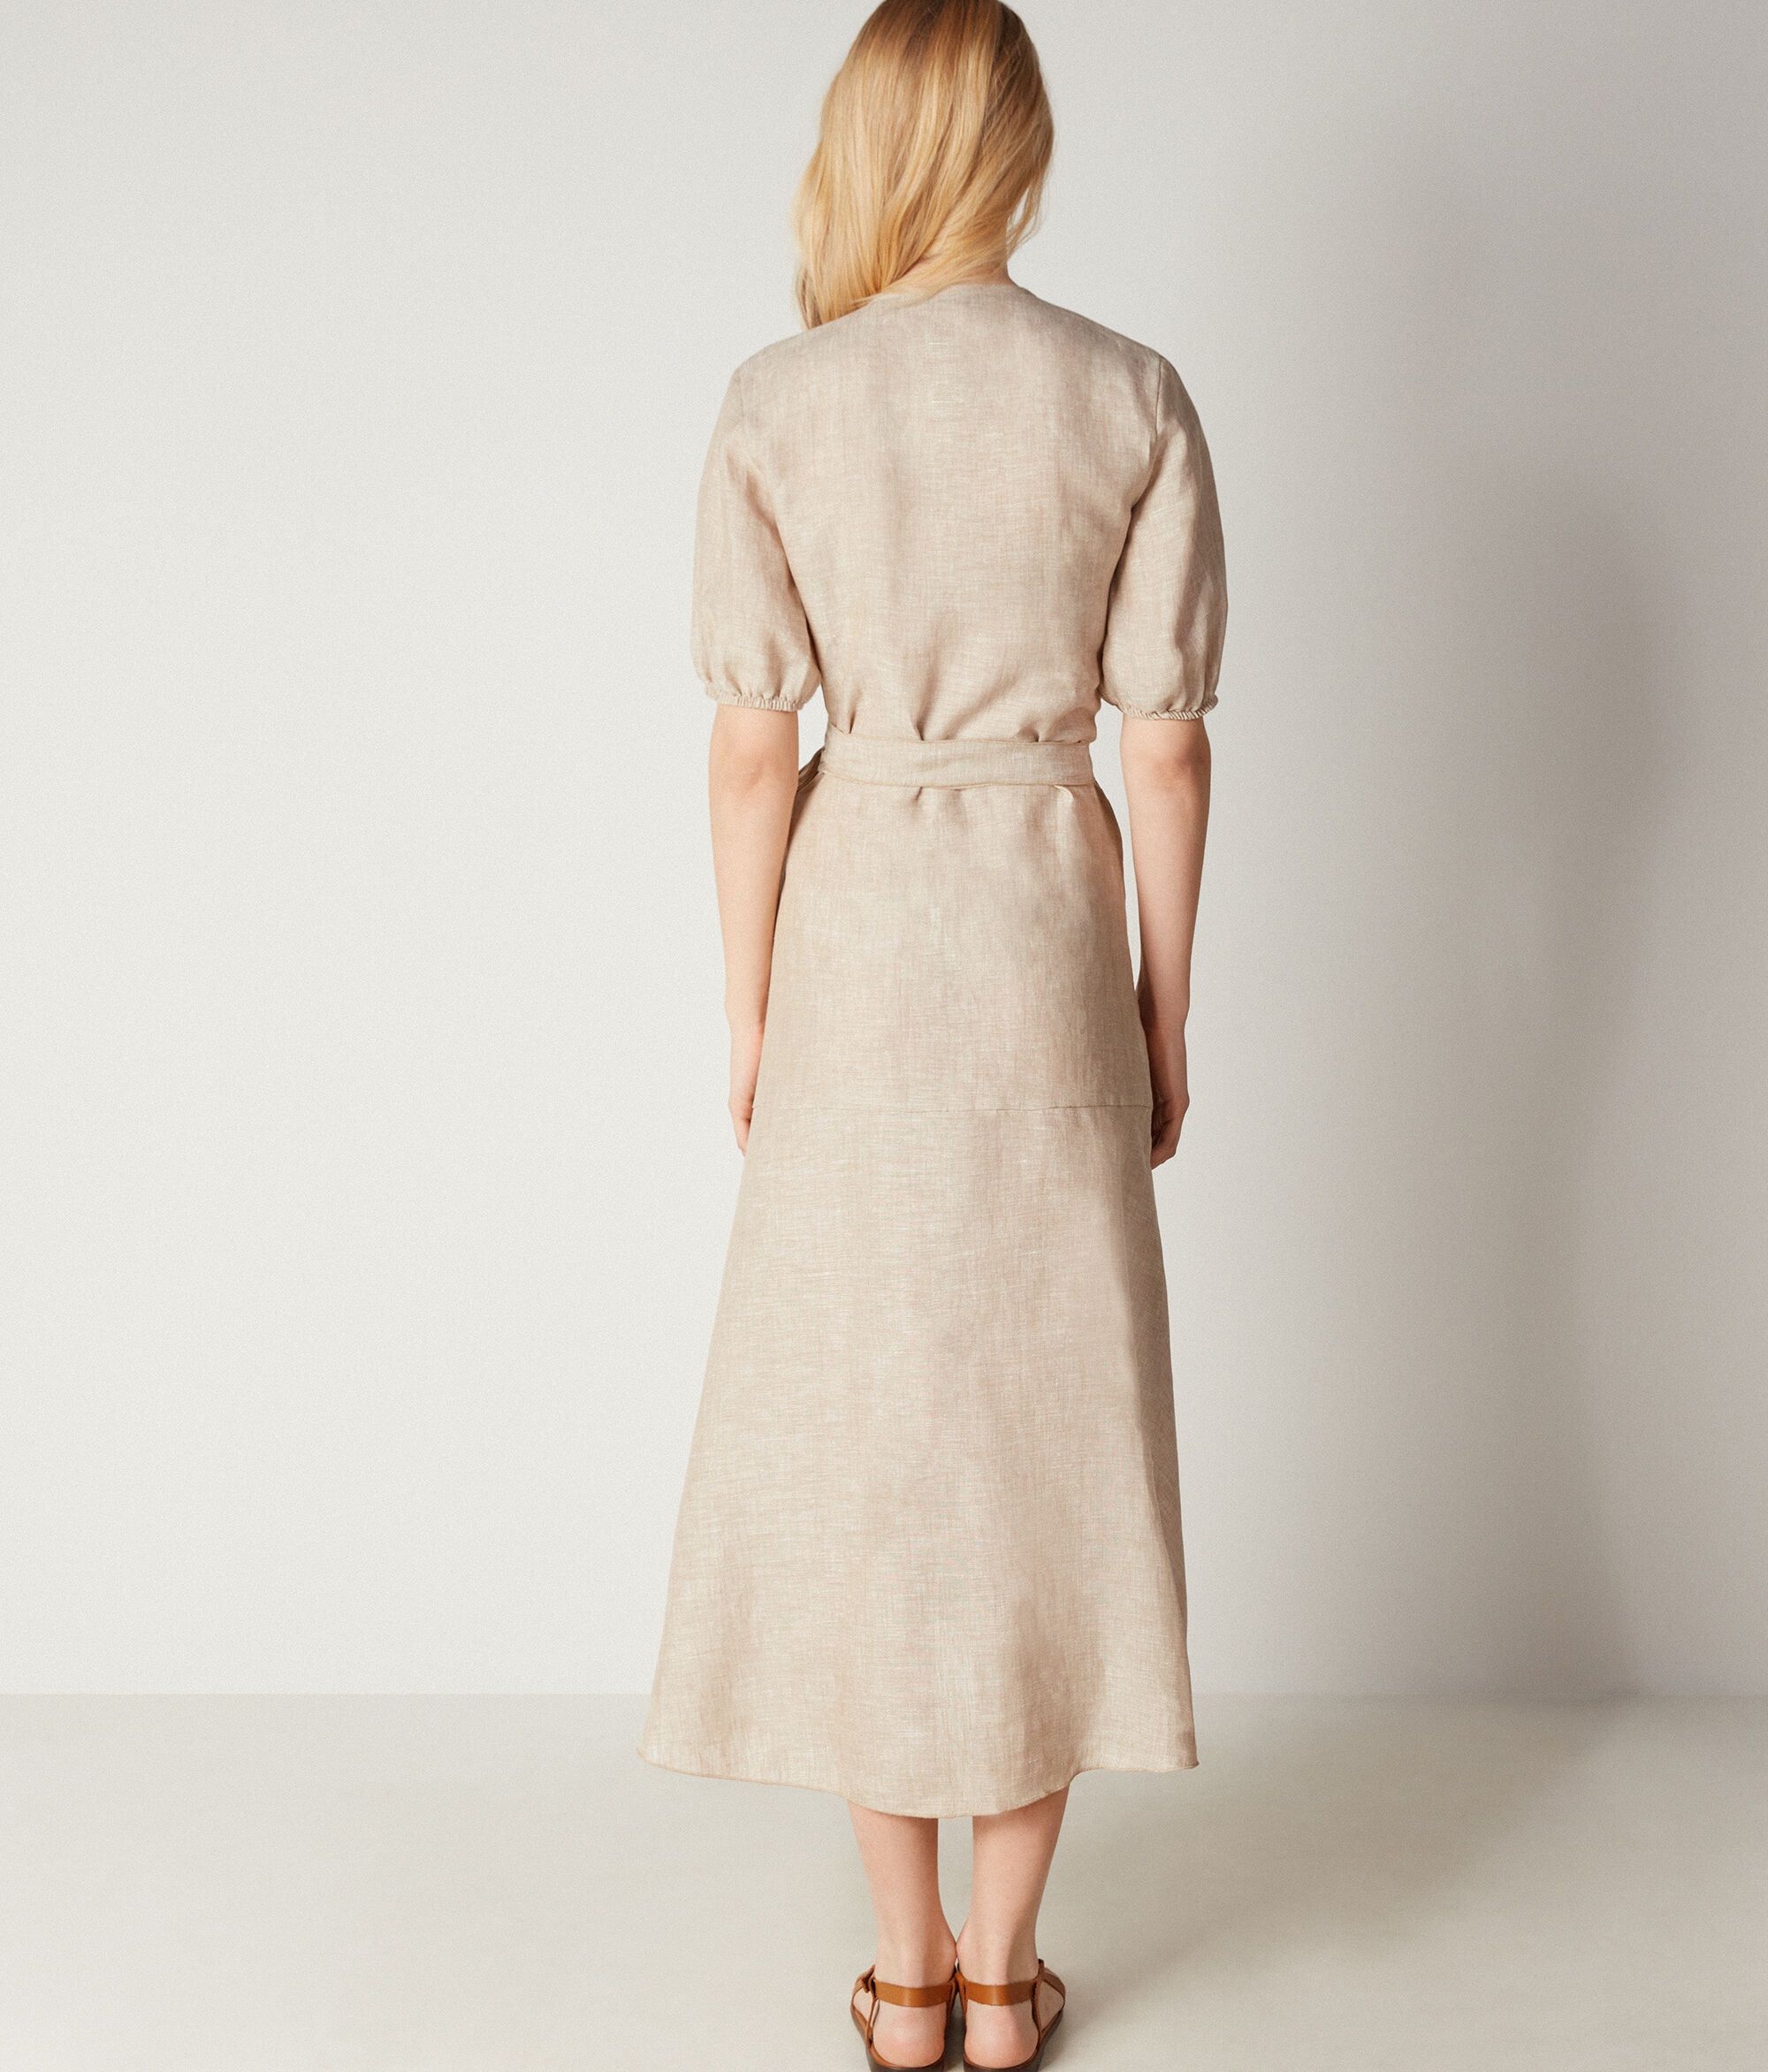 Linen dress with button closure